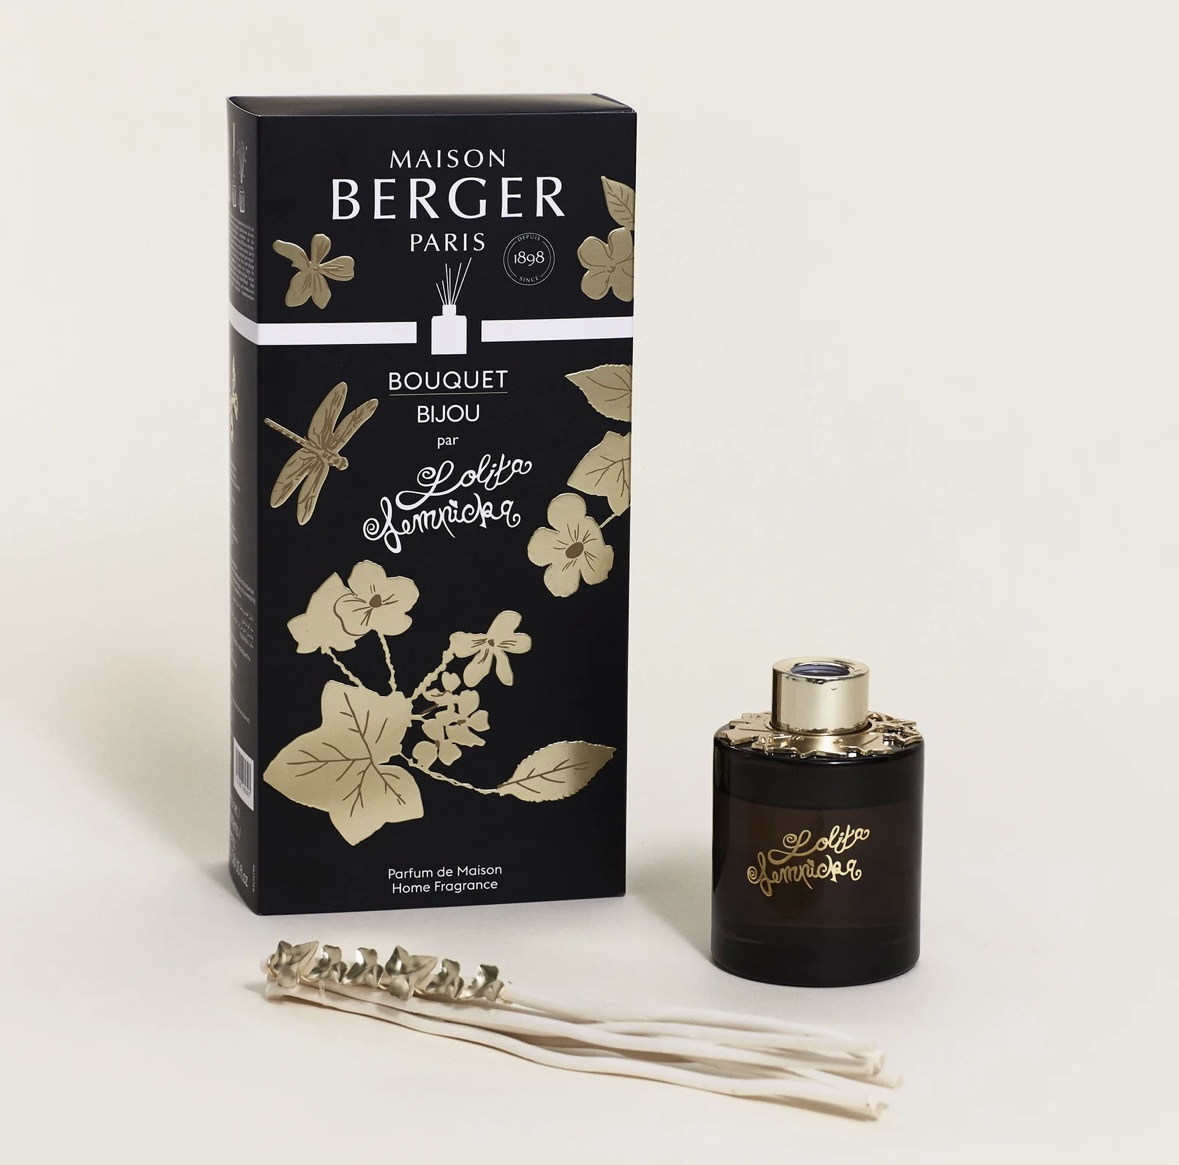 Lampe Berger (Maison Berger Paris) Bijou Scented Bouquet - Lolita Lempicka  (Black) 115ml/3.8oz 115ml/3.8oz buy in United States with free shipping  CosmoStore